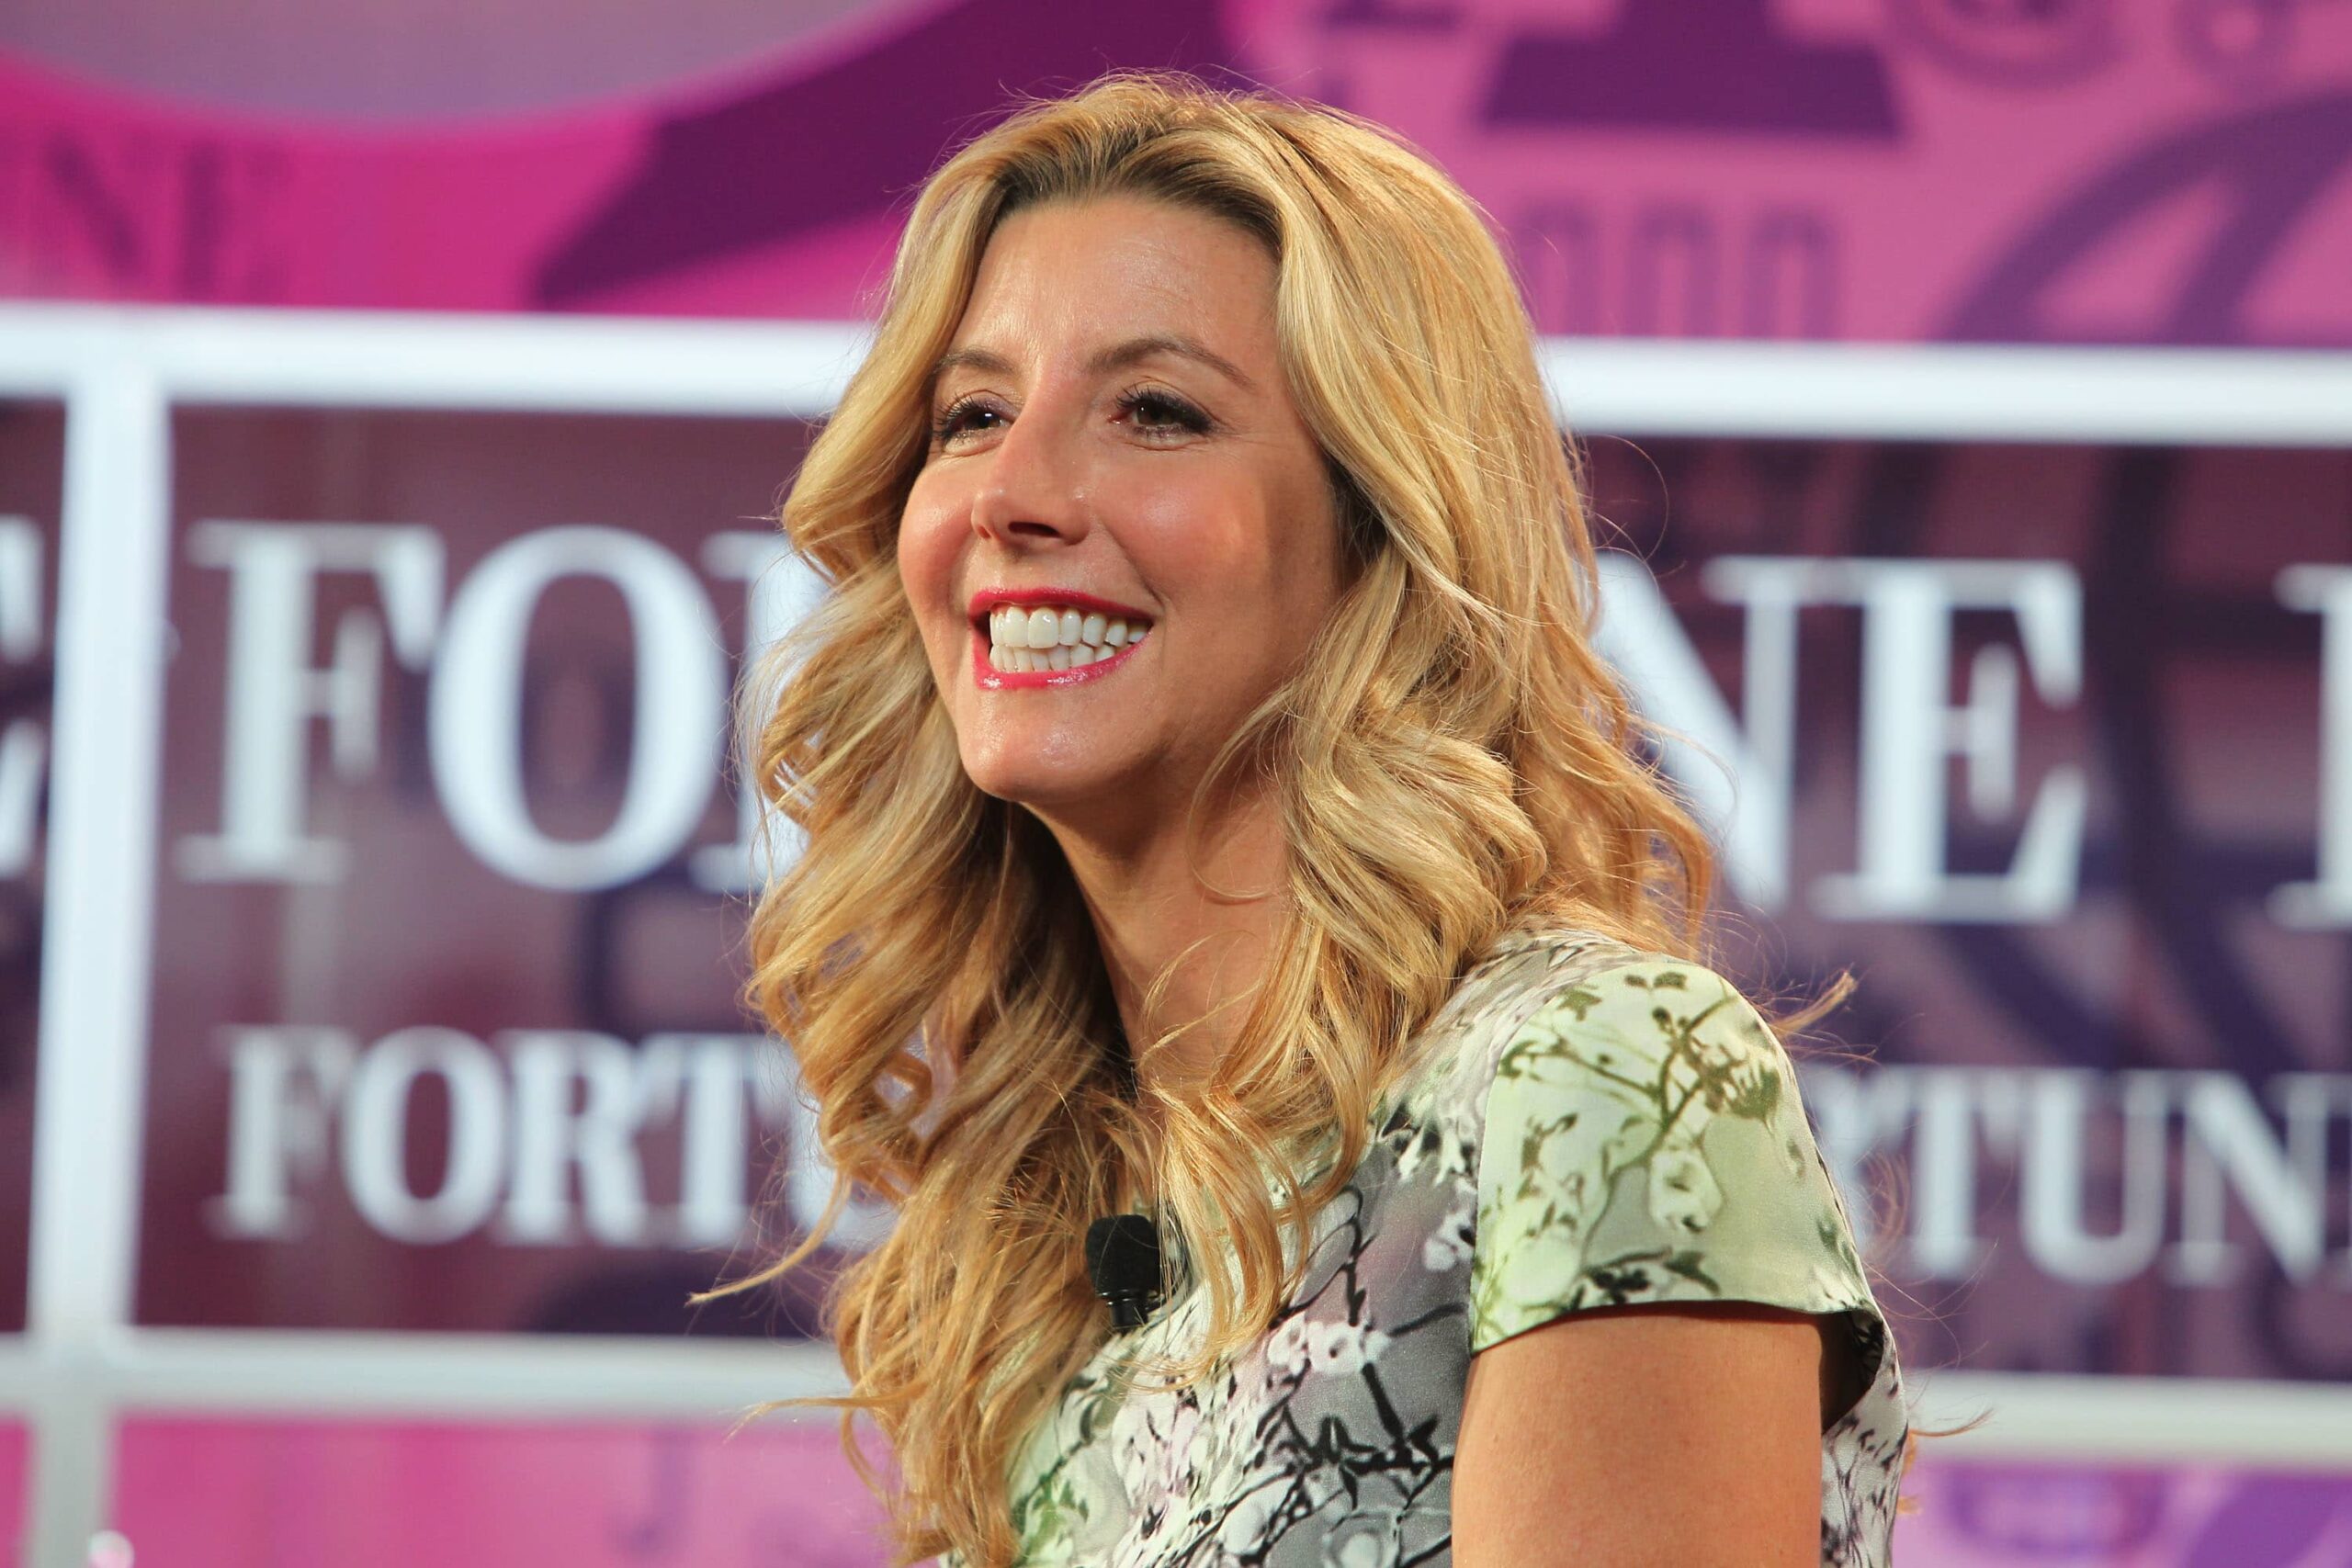 Spanx founder Sara Blakely says business will to expand to denim and more